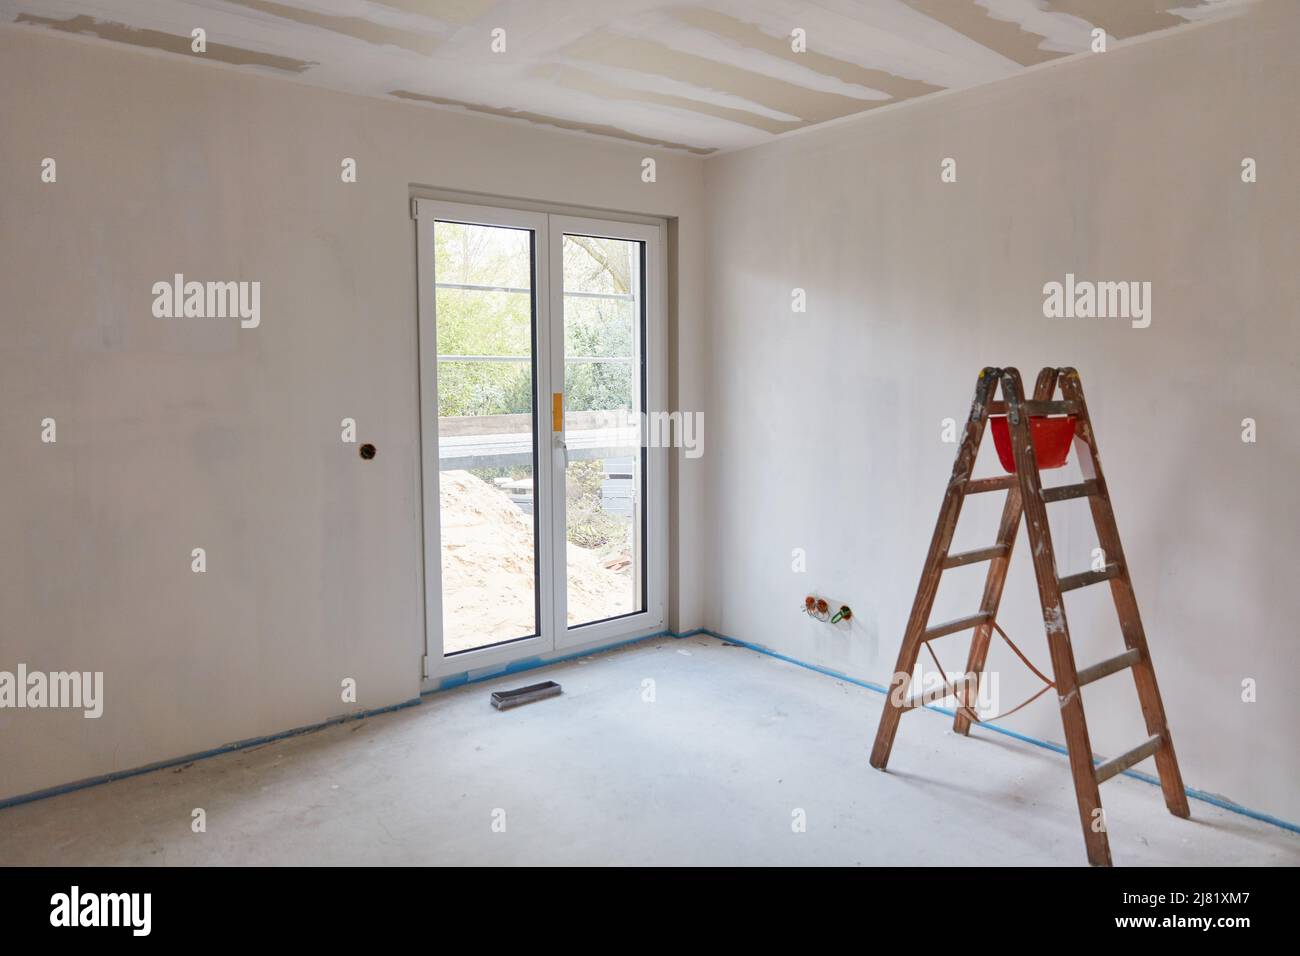 Head stands for painting work on wall in room at house new construction project Stock Photo